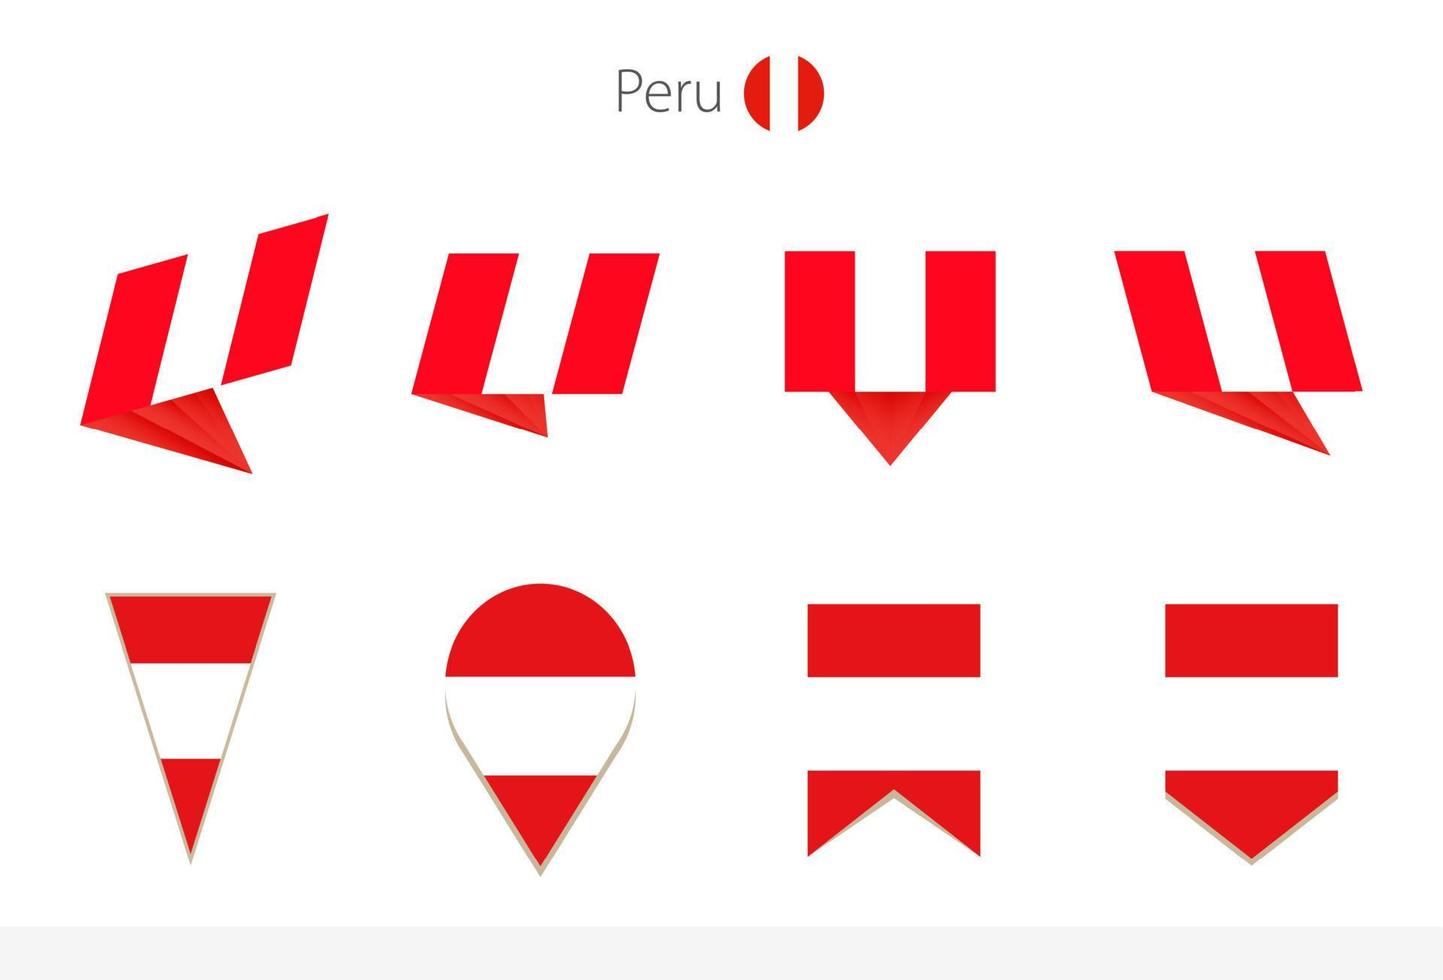 Peru national flag collection, eight versions of Peru vector flags.